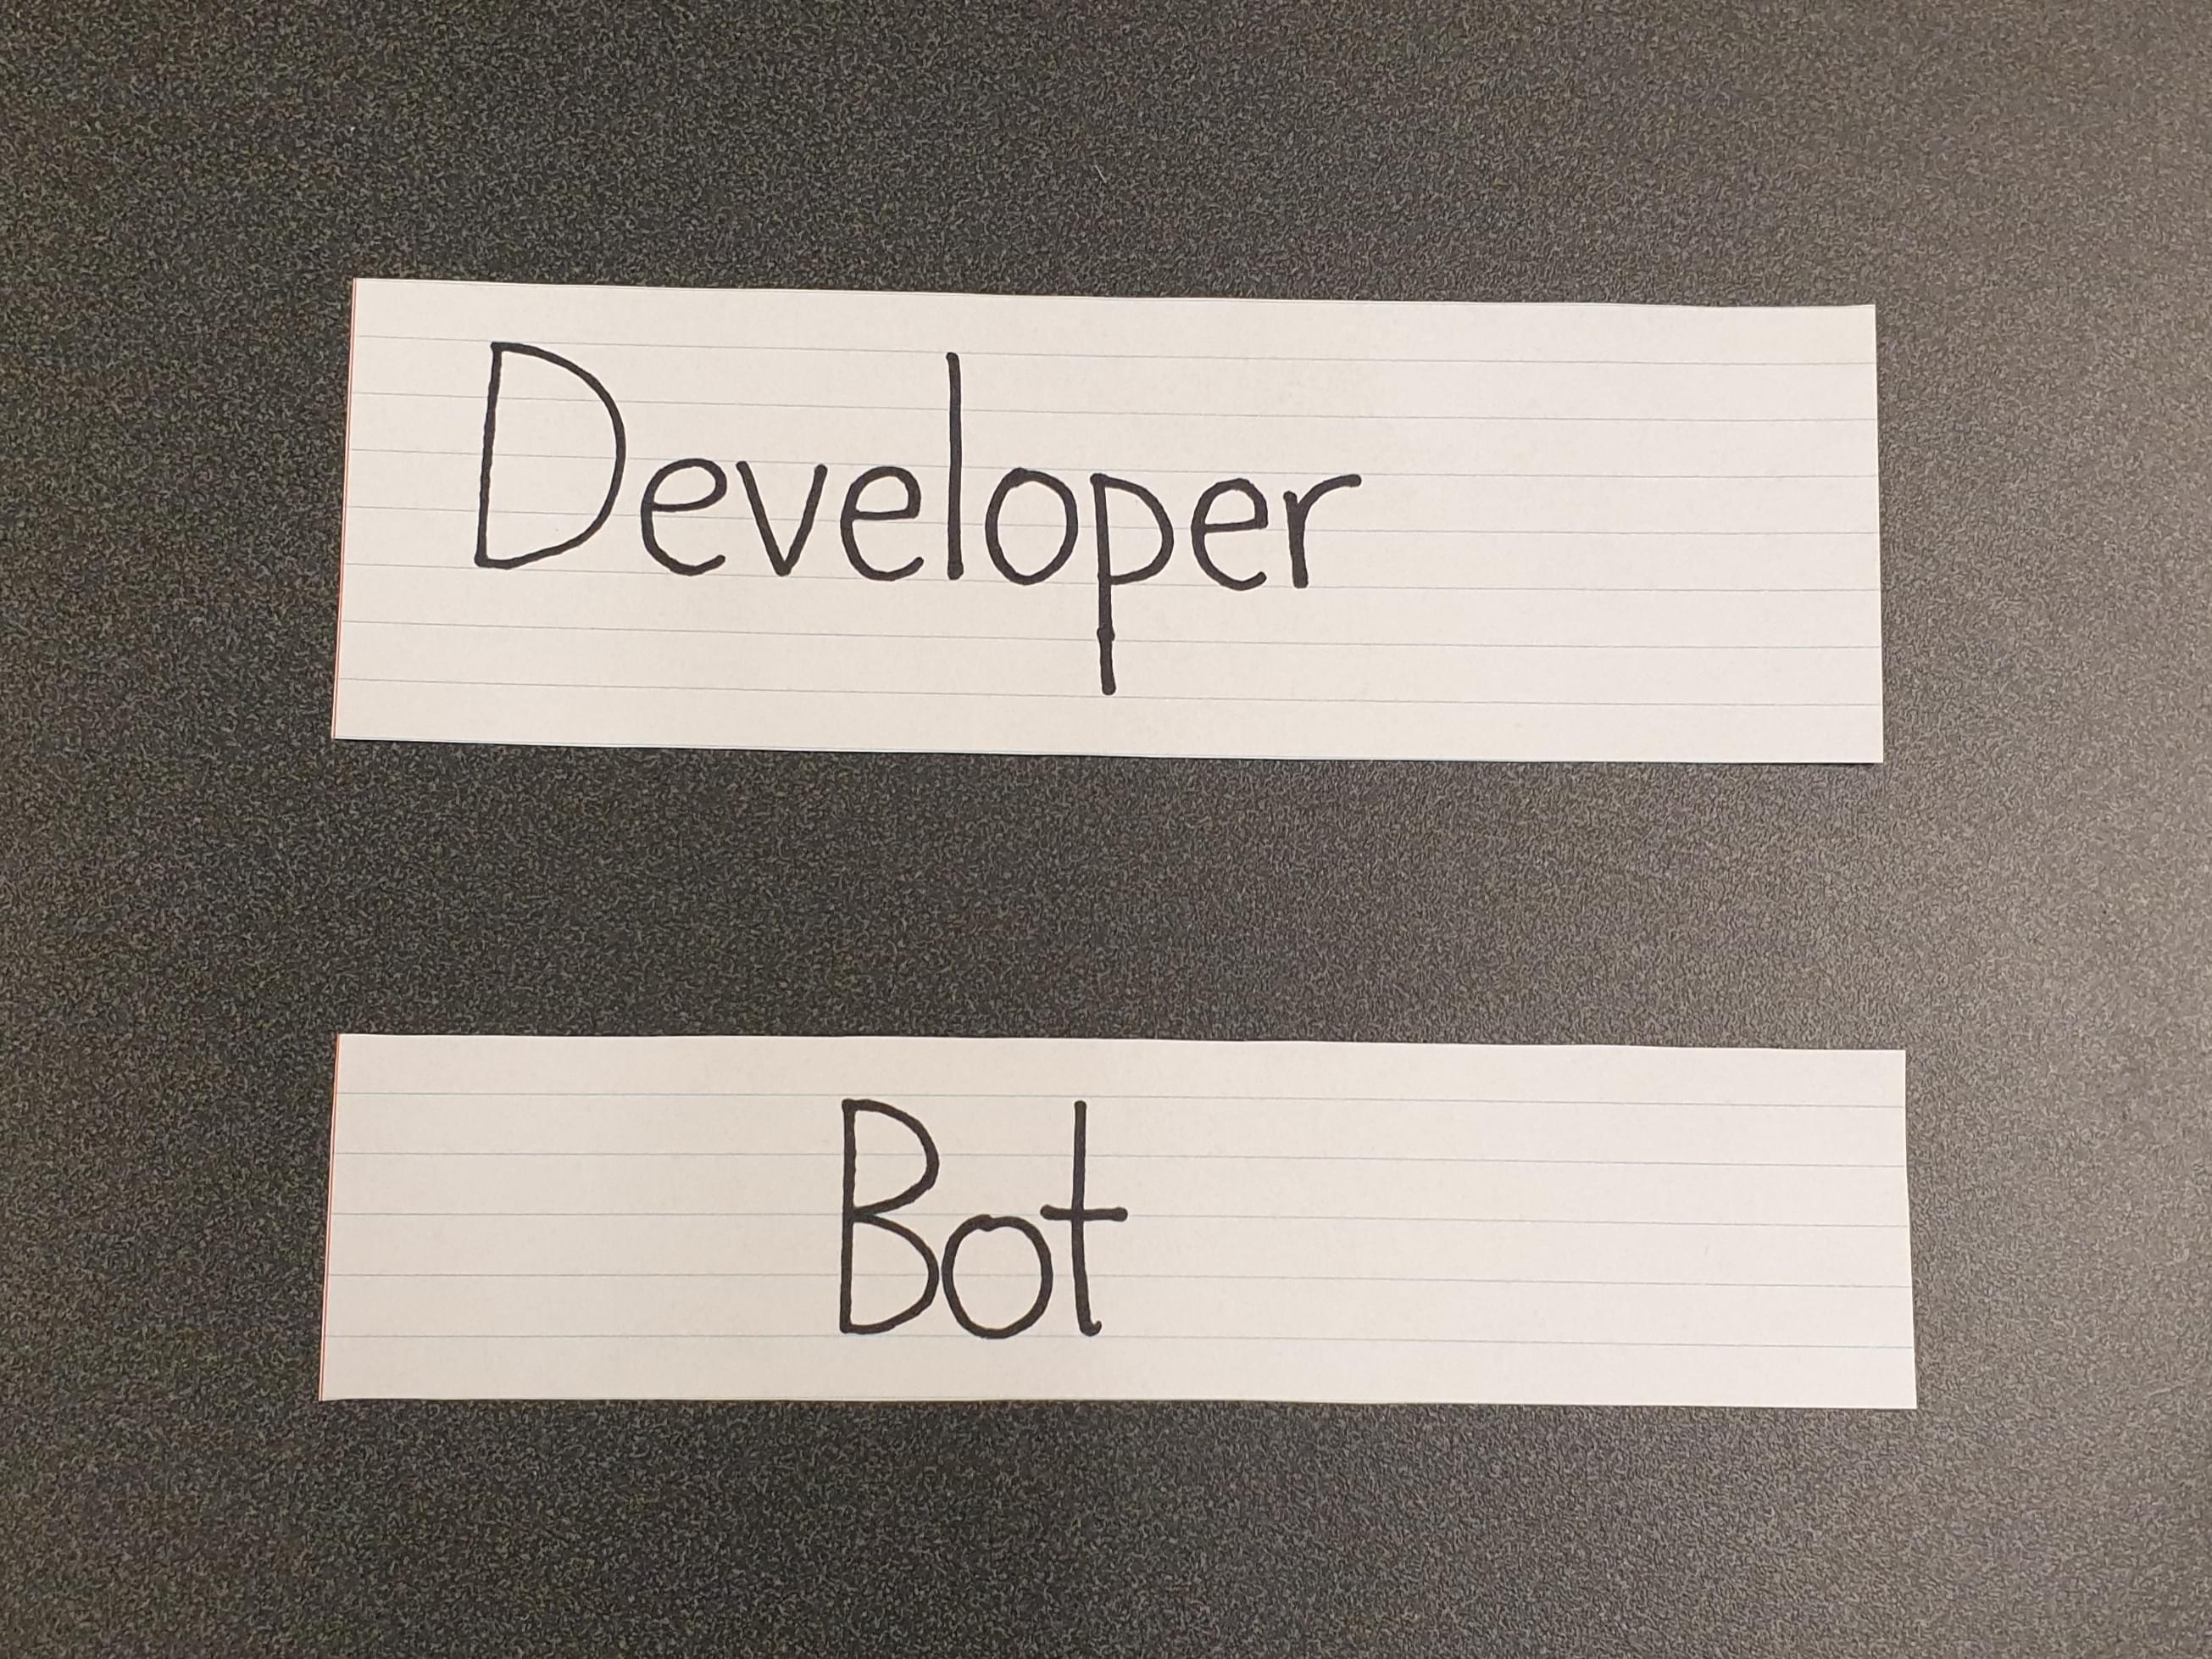 Two labels, one labelled developer and one labelled bot.